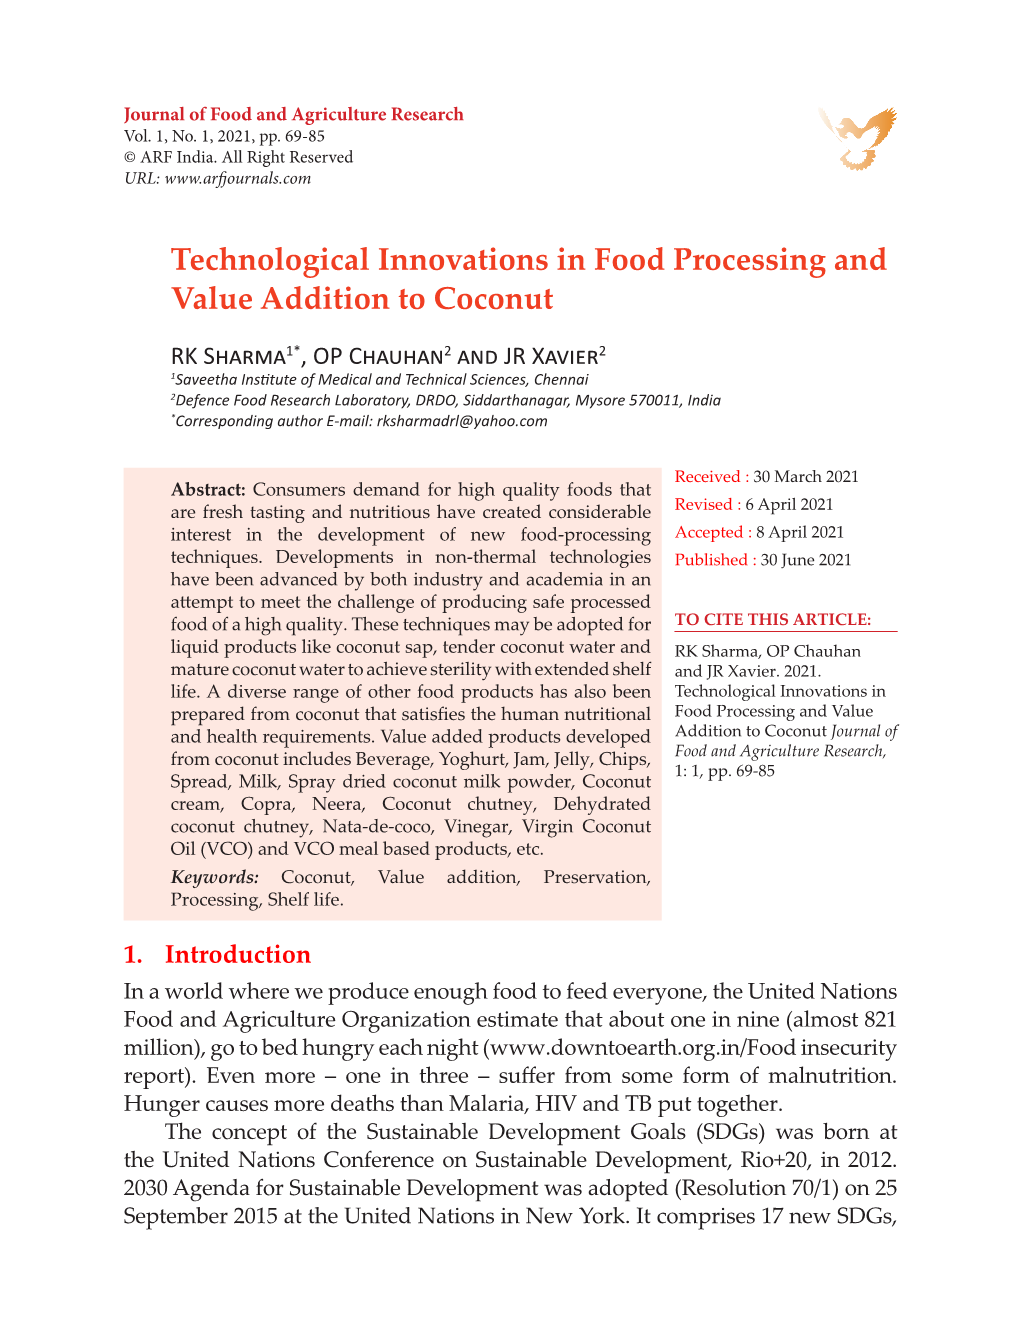 Technological Innovations in Food Processing and Value Addition to Coconut